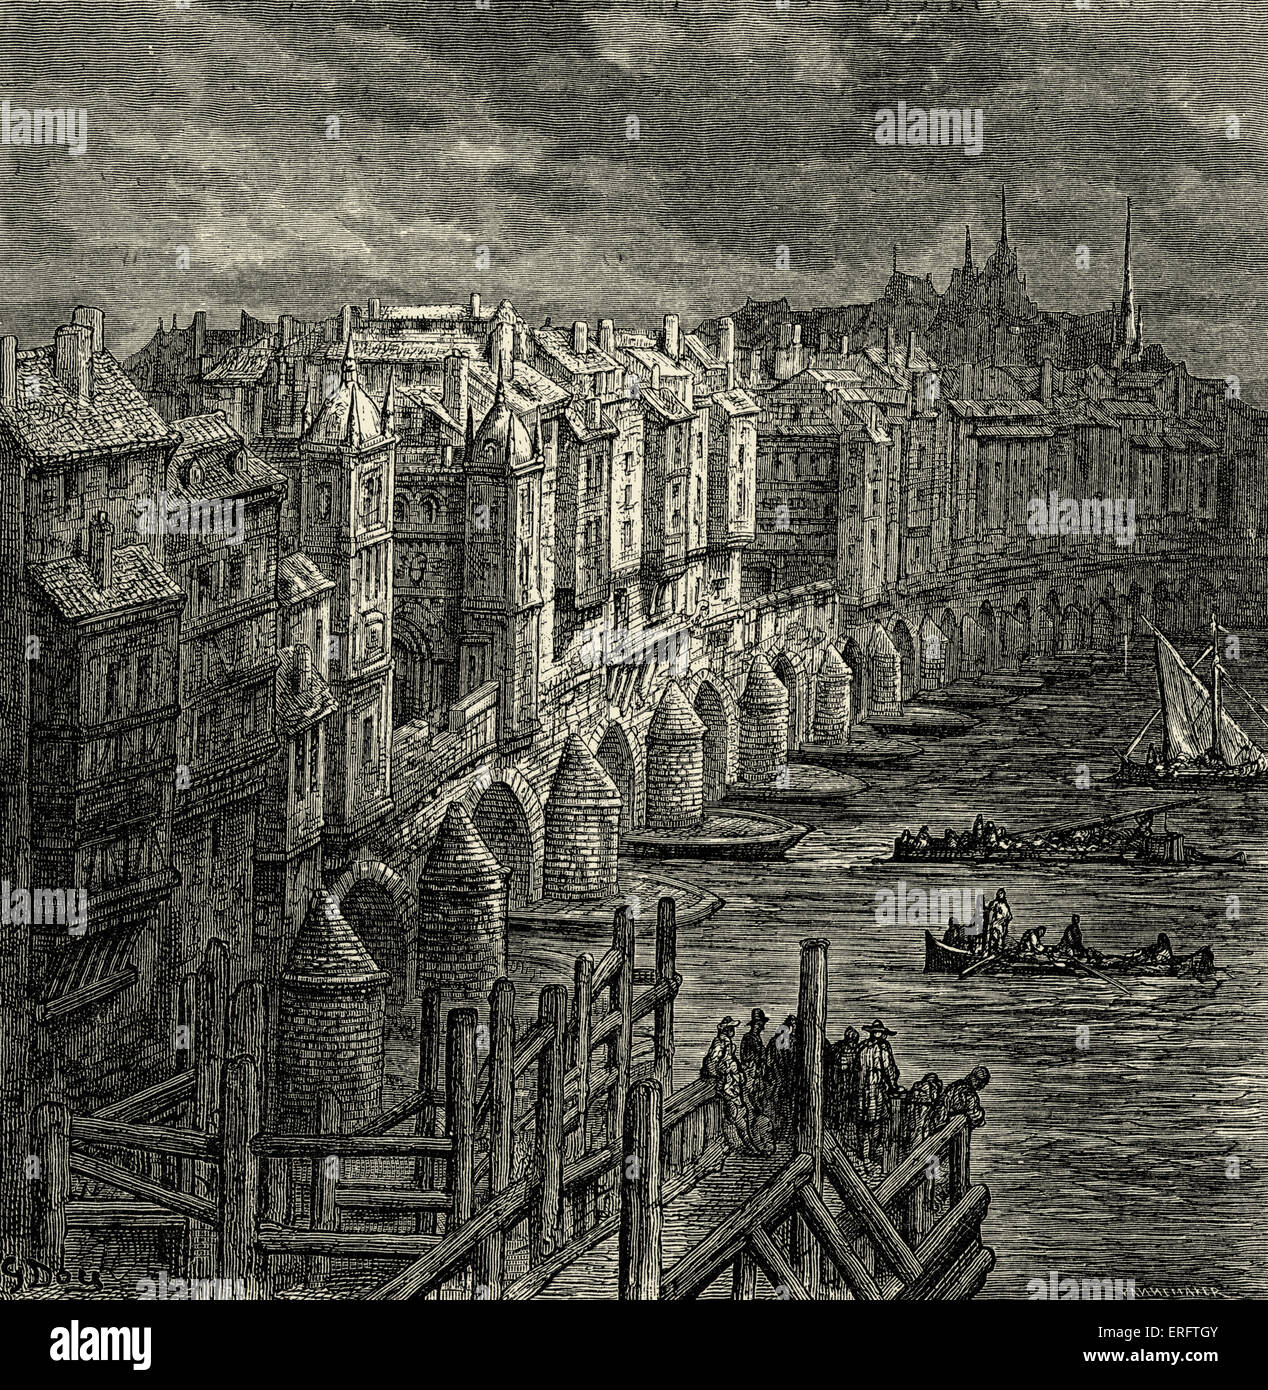 London Bridge. - showing houses built along the bridgeEngraving by Gustave Doré, from 'London, a Pilgrimage, by Gustave Doré and Blanchard Jerrold', 1872. Stock Photo